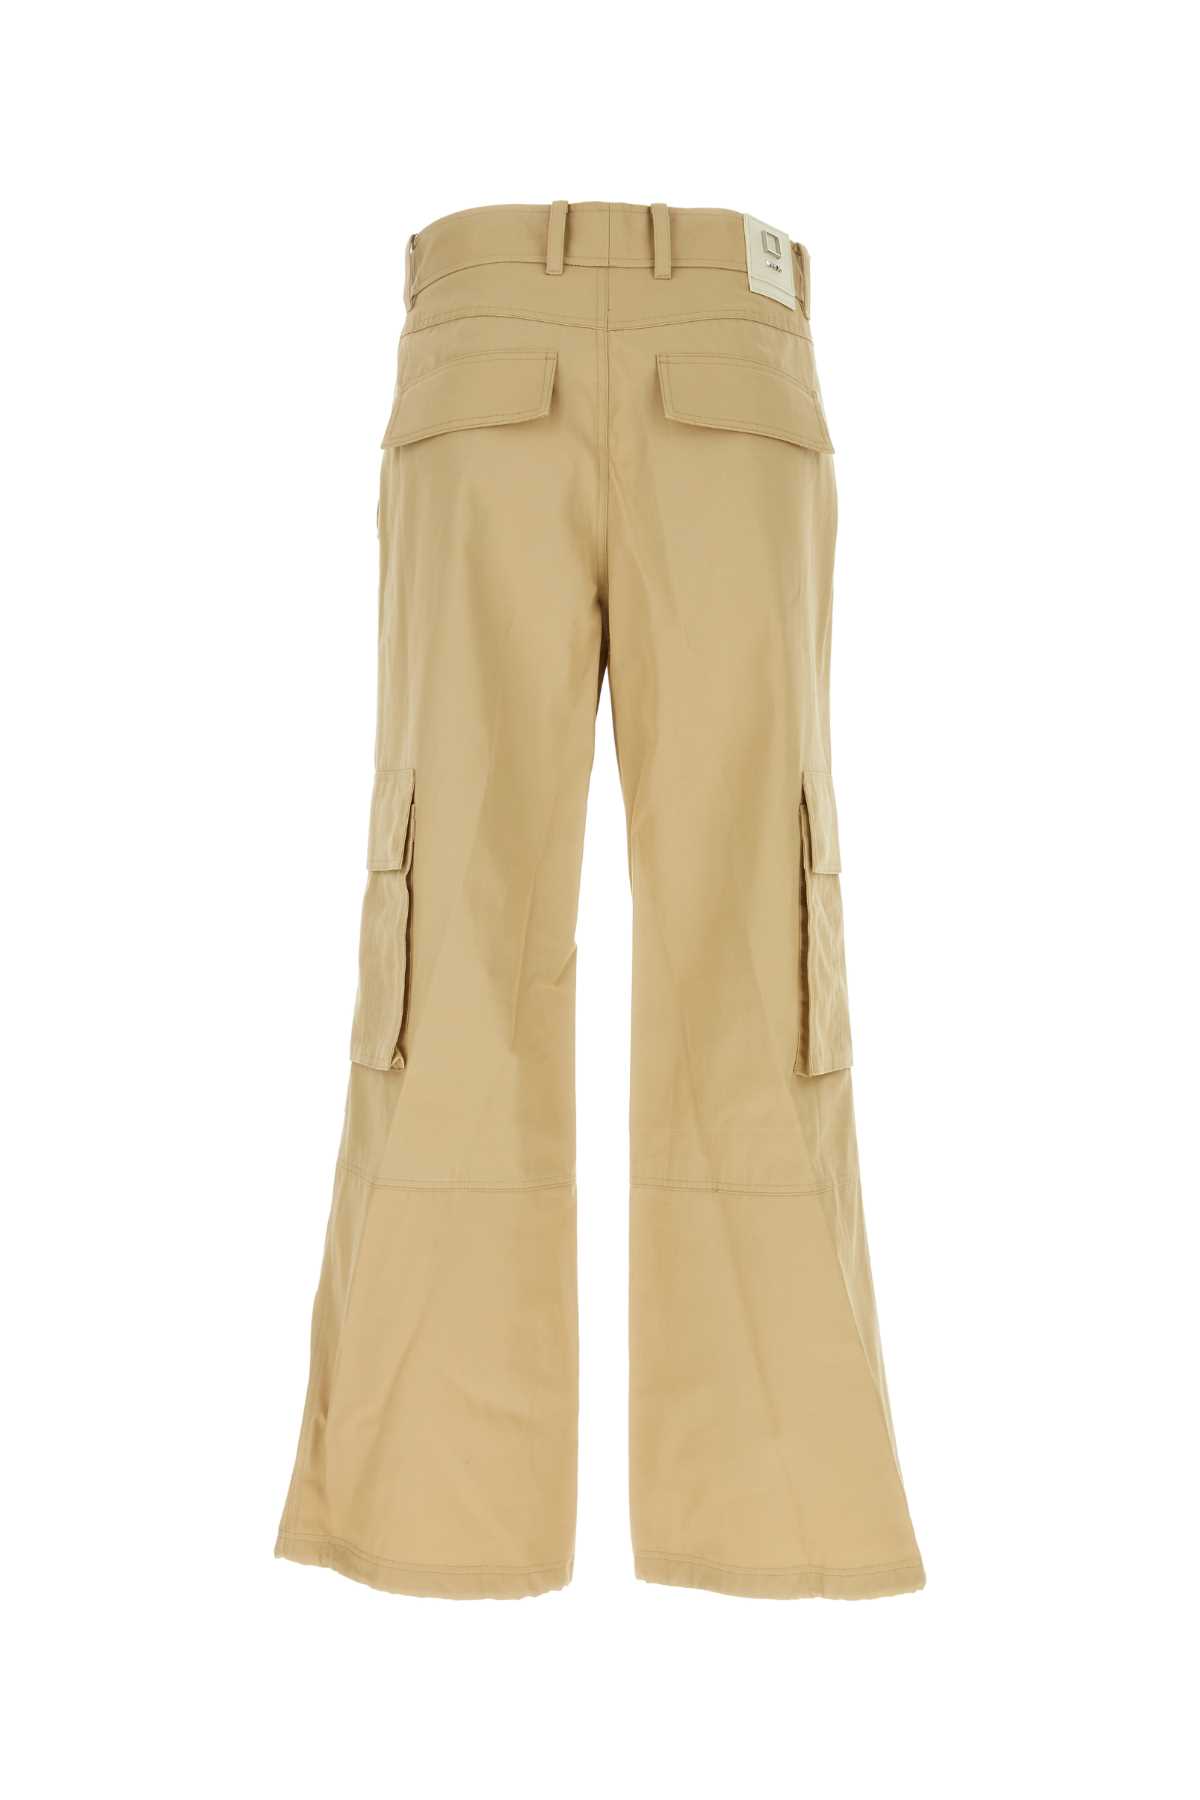 WOOYOUNGMI BEIGE COTTON CARGO PANT